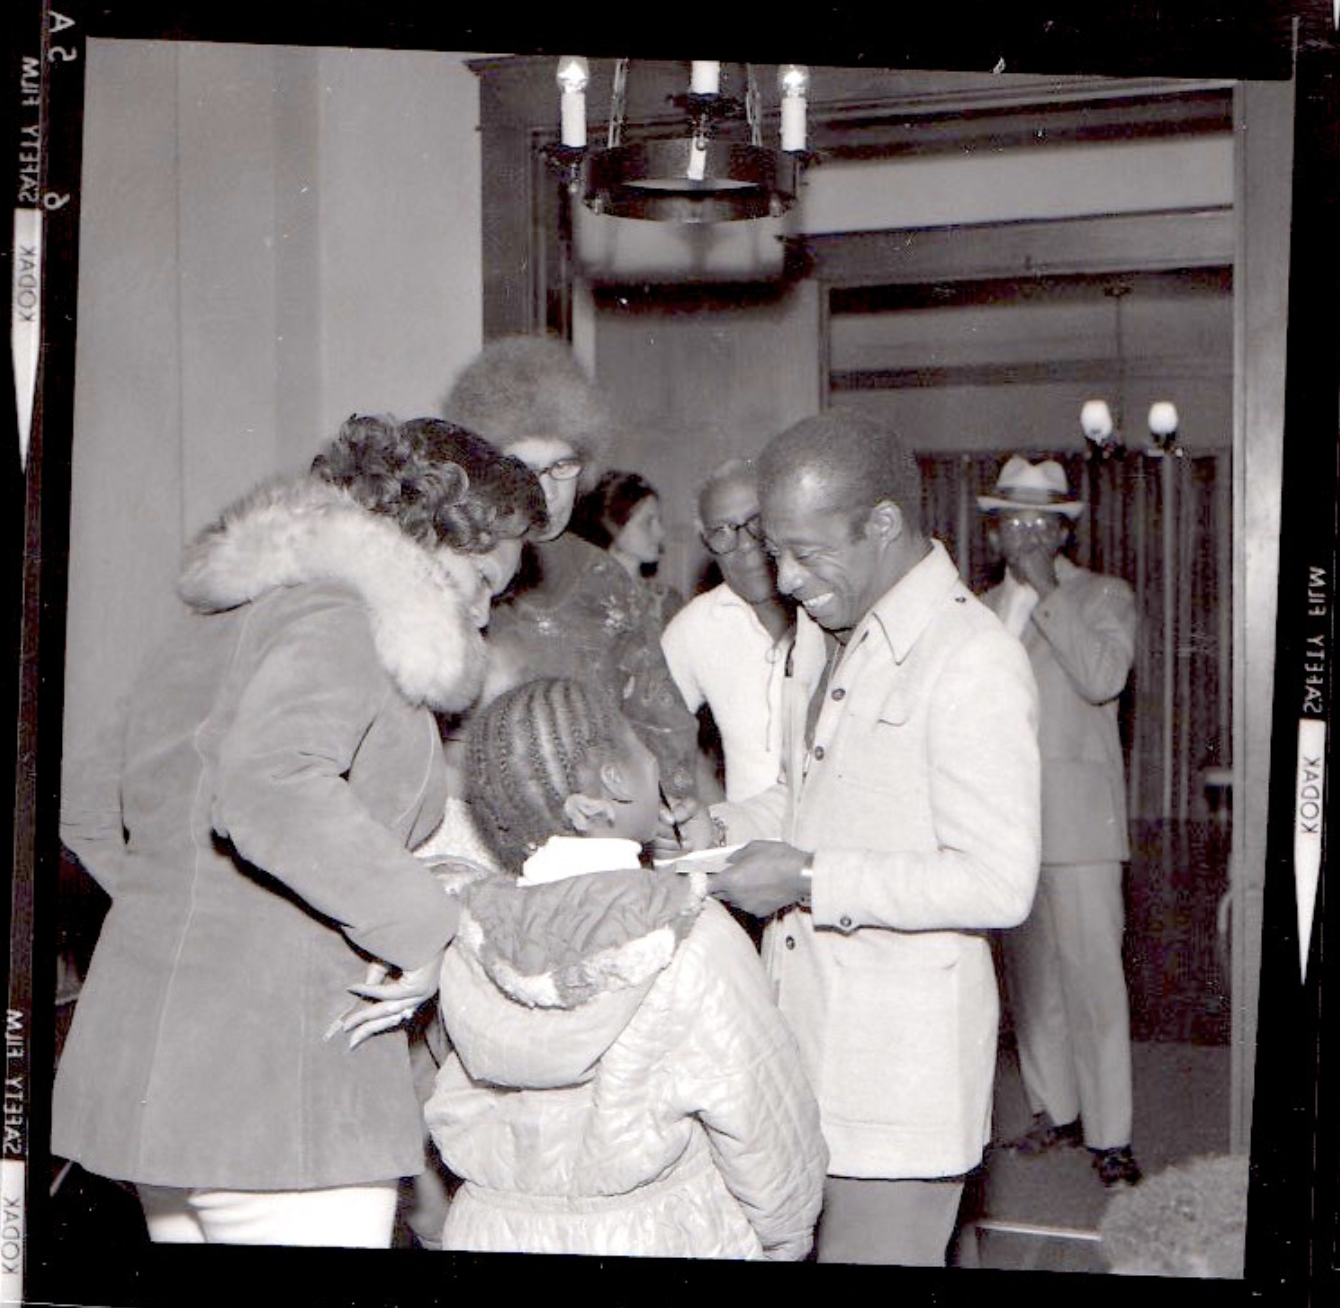 Author James Baldwin greet a young child and mother at the door.